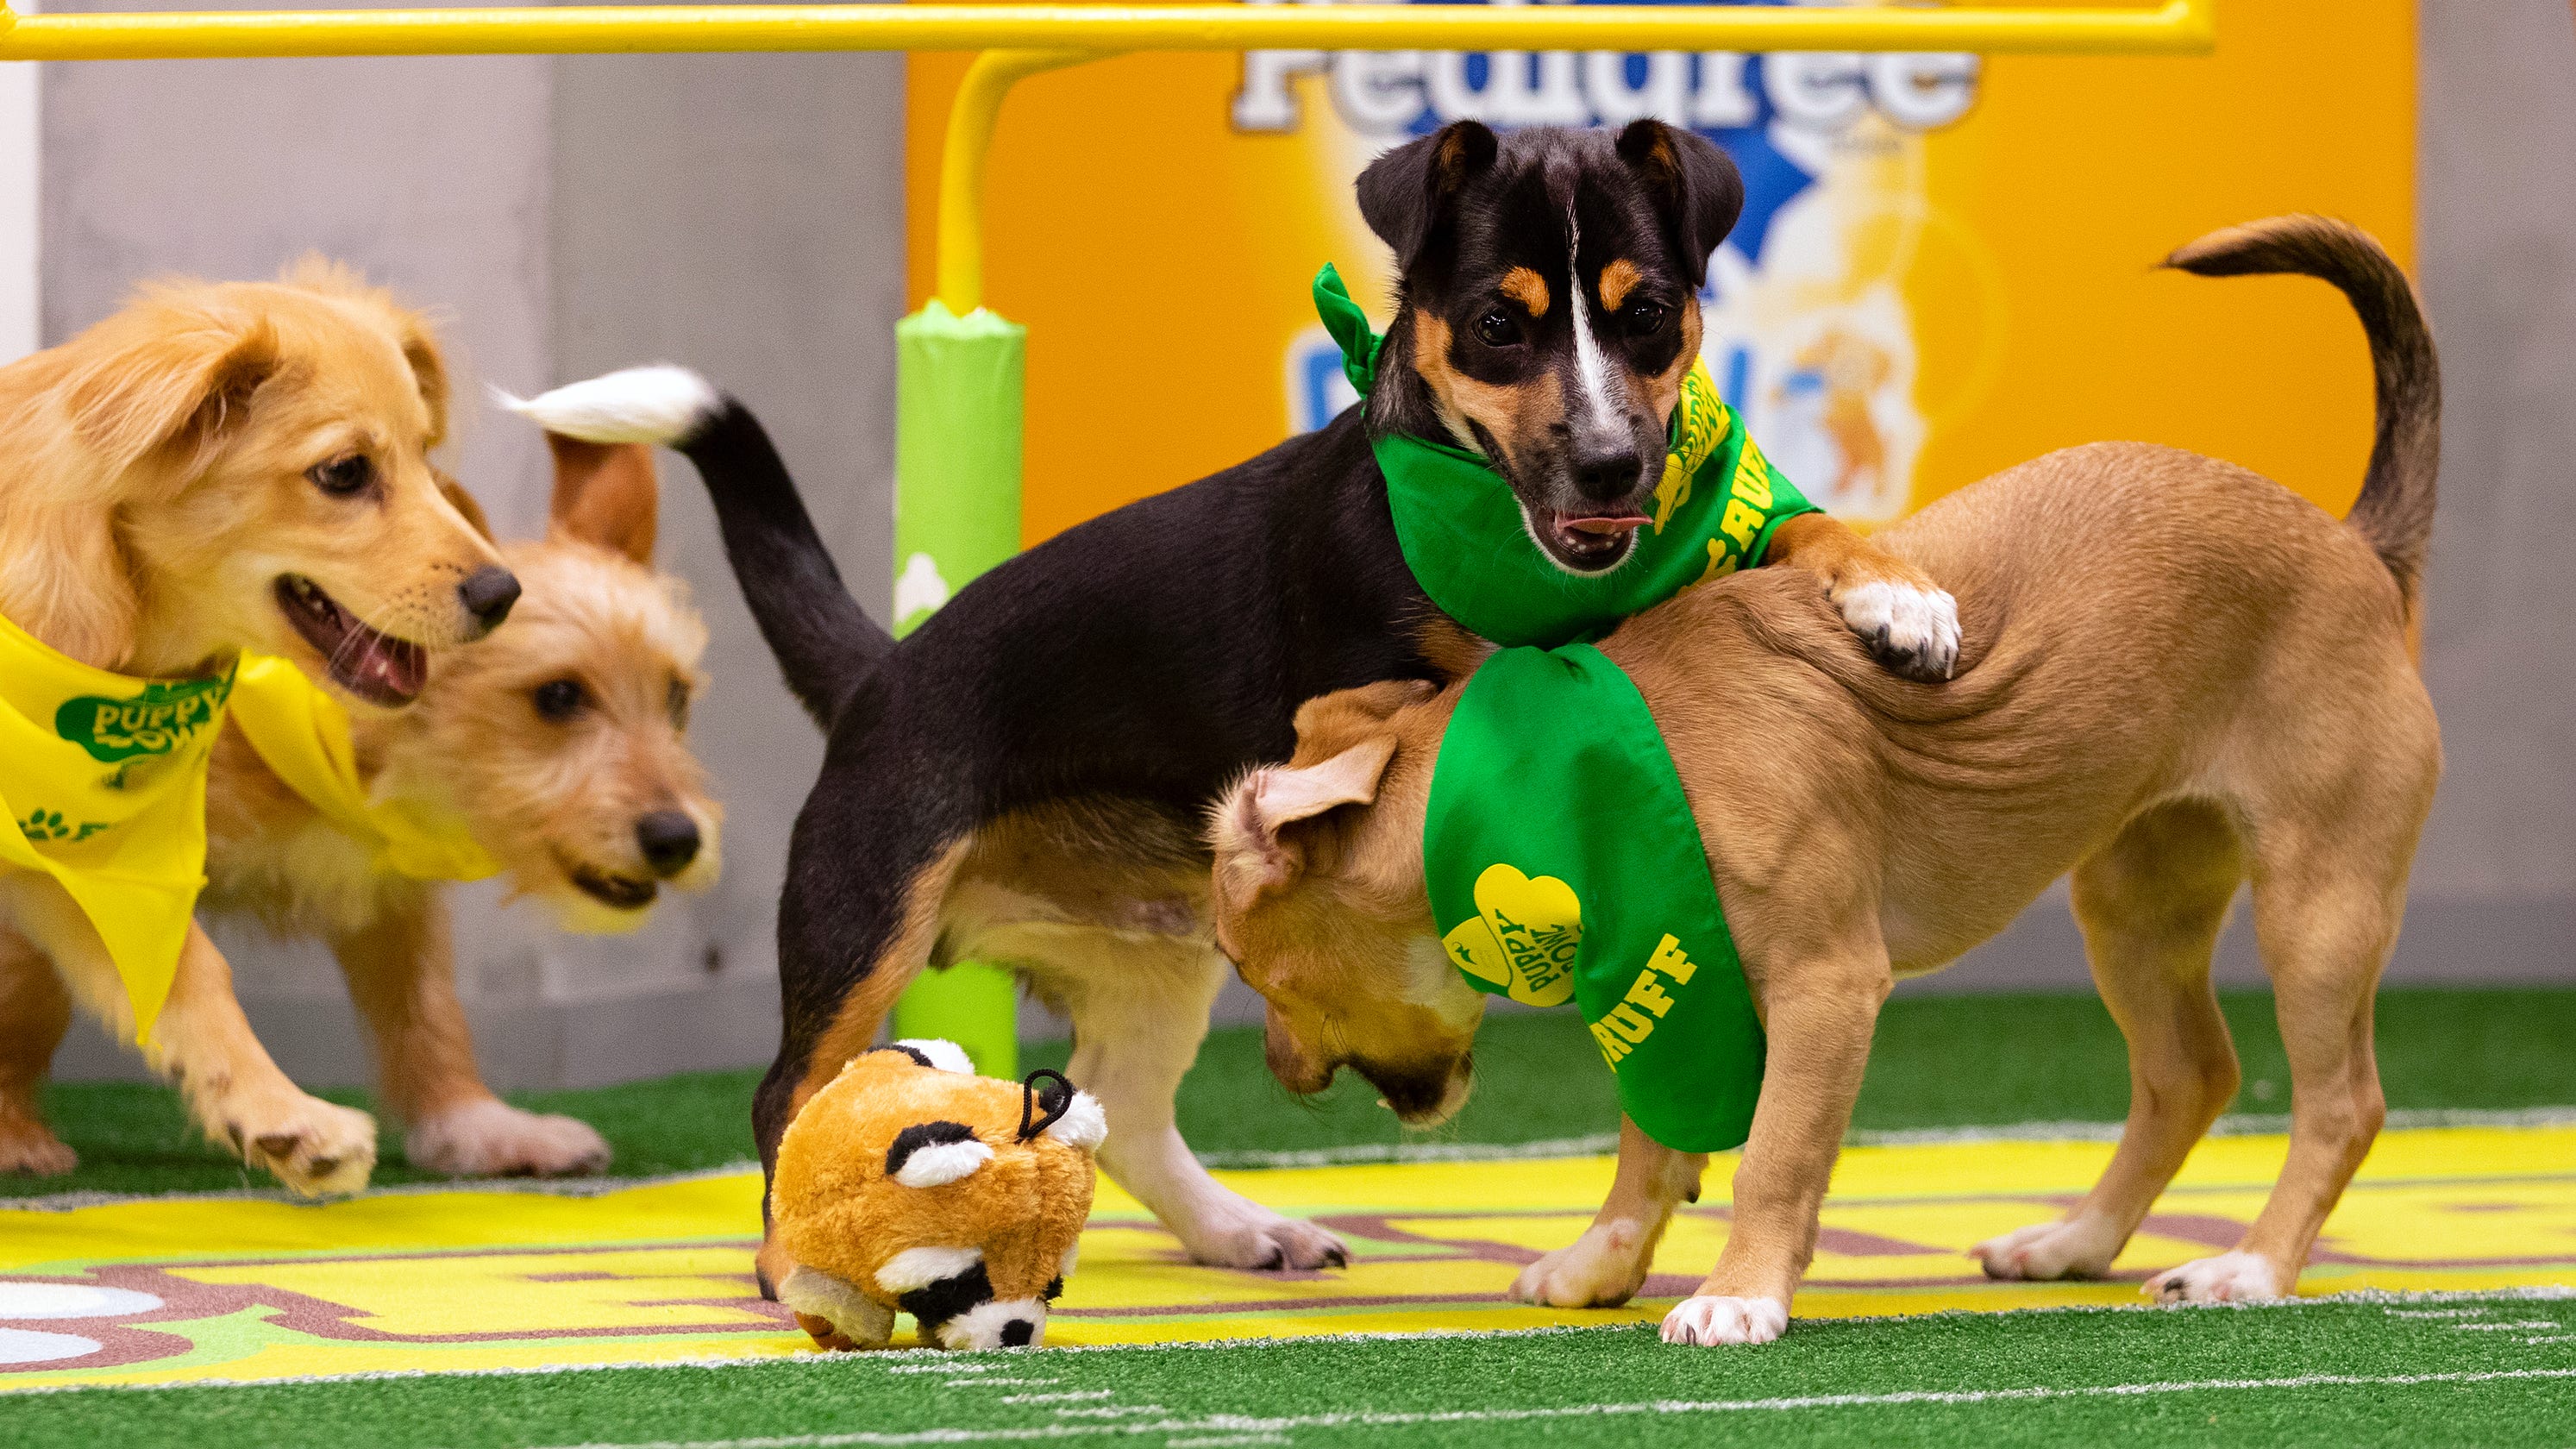 Puppy Bowl 2019: 6 Nashville dogs to compete in Animal Planet's Super Bowl show